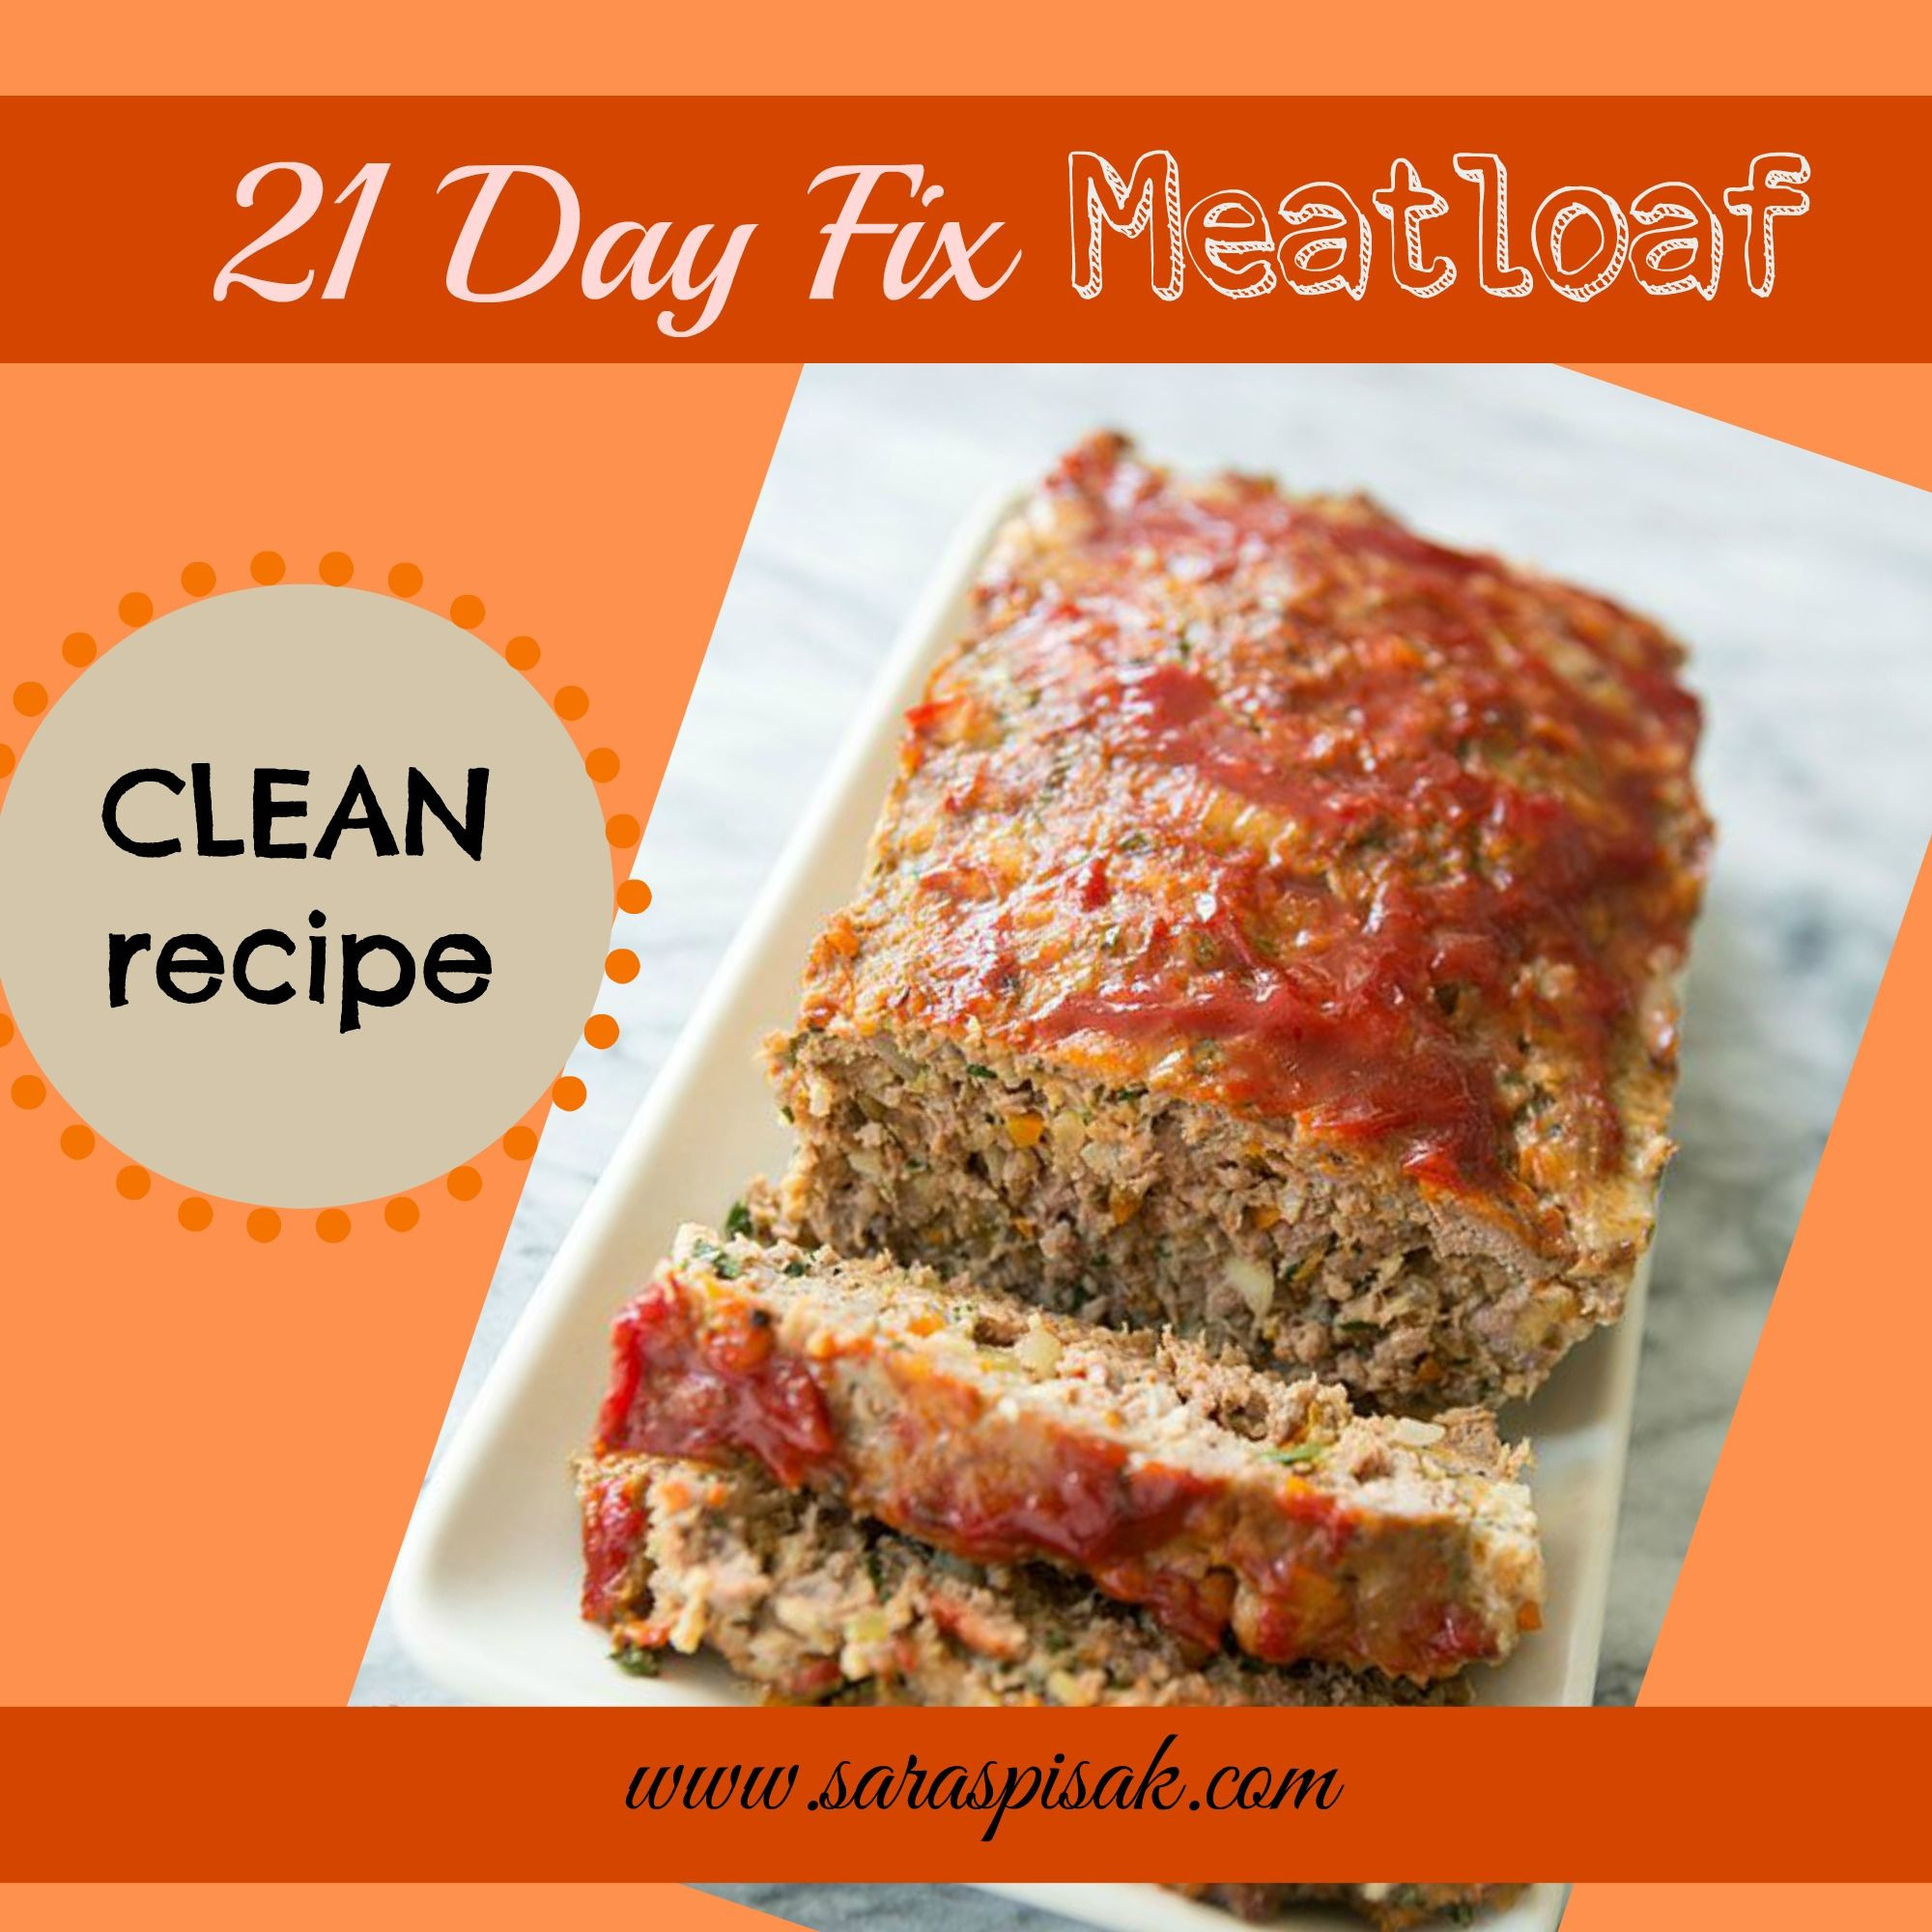 21 Day Fix Turkey Meatloaf
 21 Day Fix approved Turkey Meatloaf a CLEAN recipe